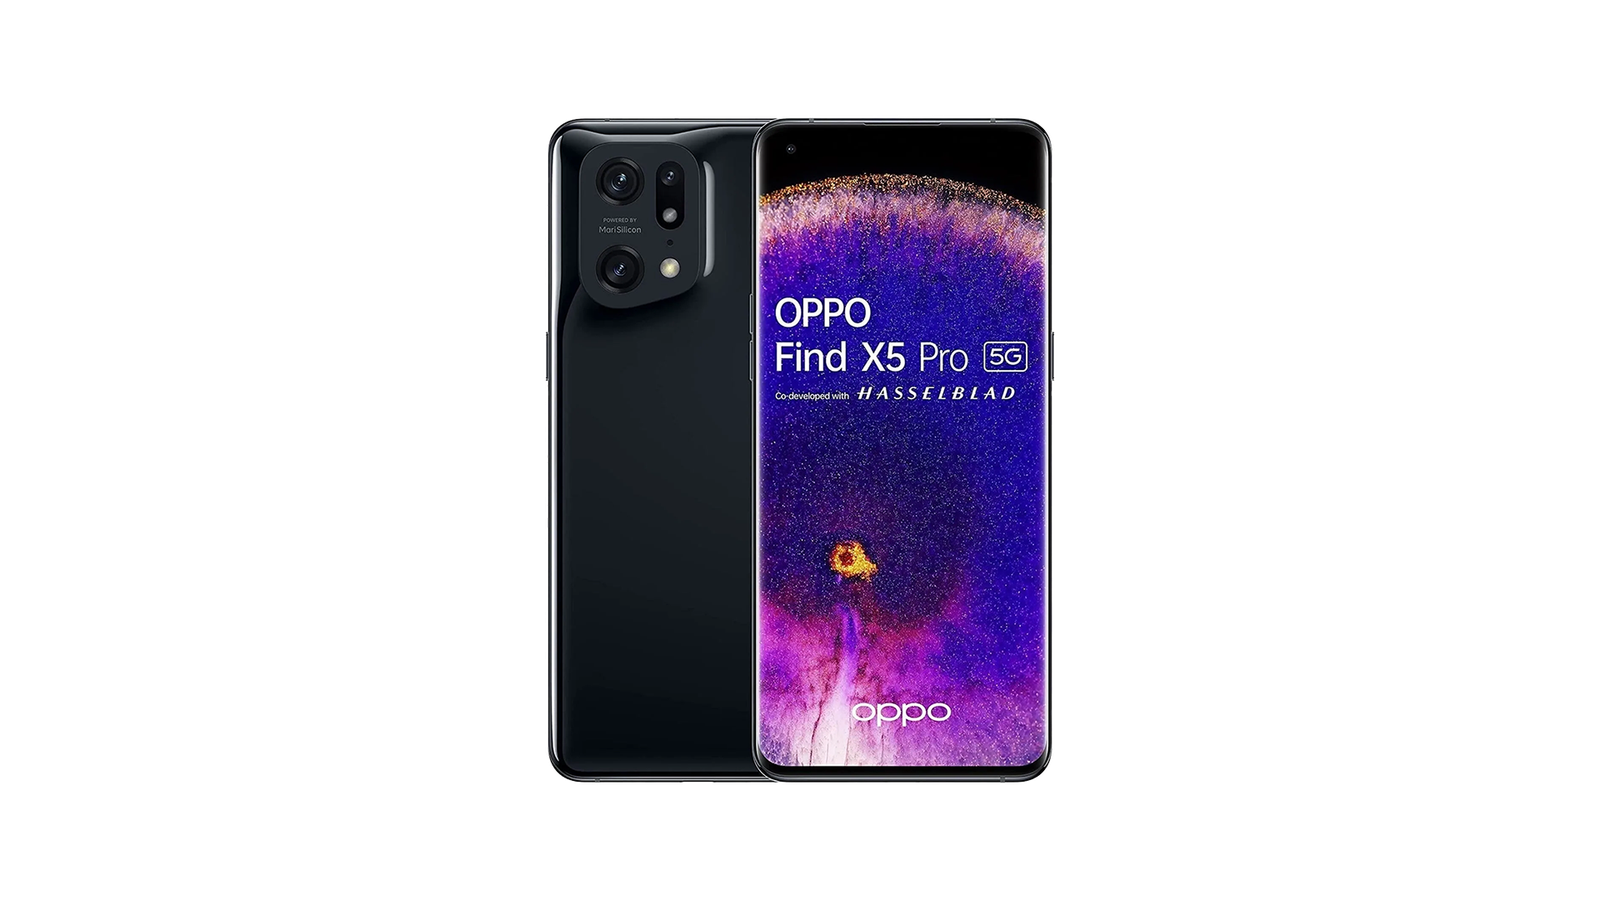 Oppo Find X5 Pro - A sleek camera phone with Hasselblad filters.